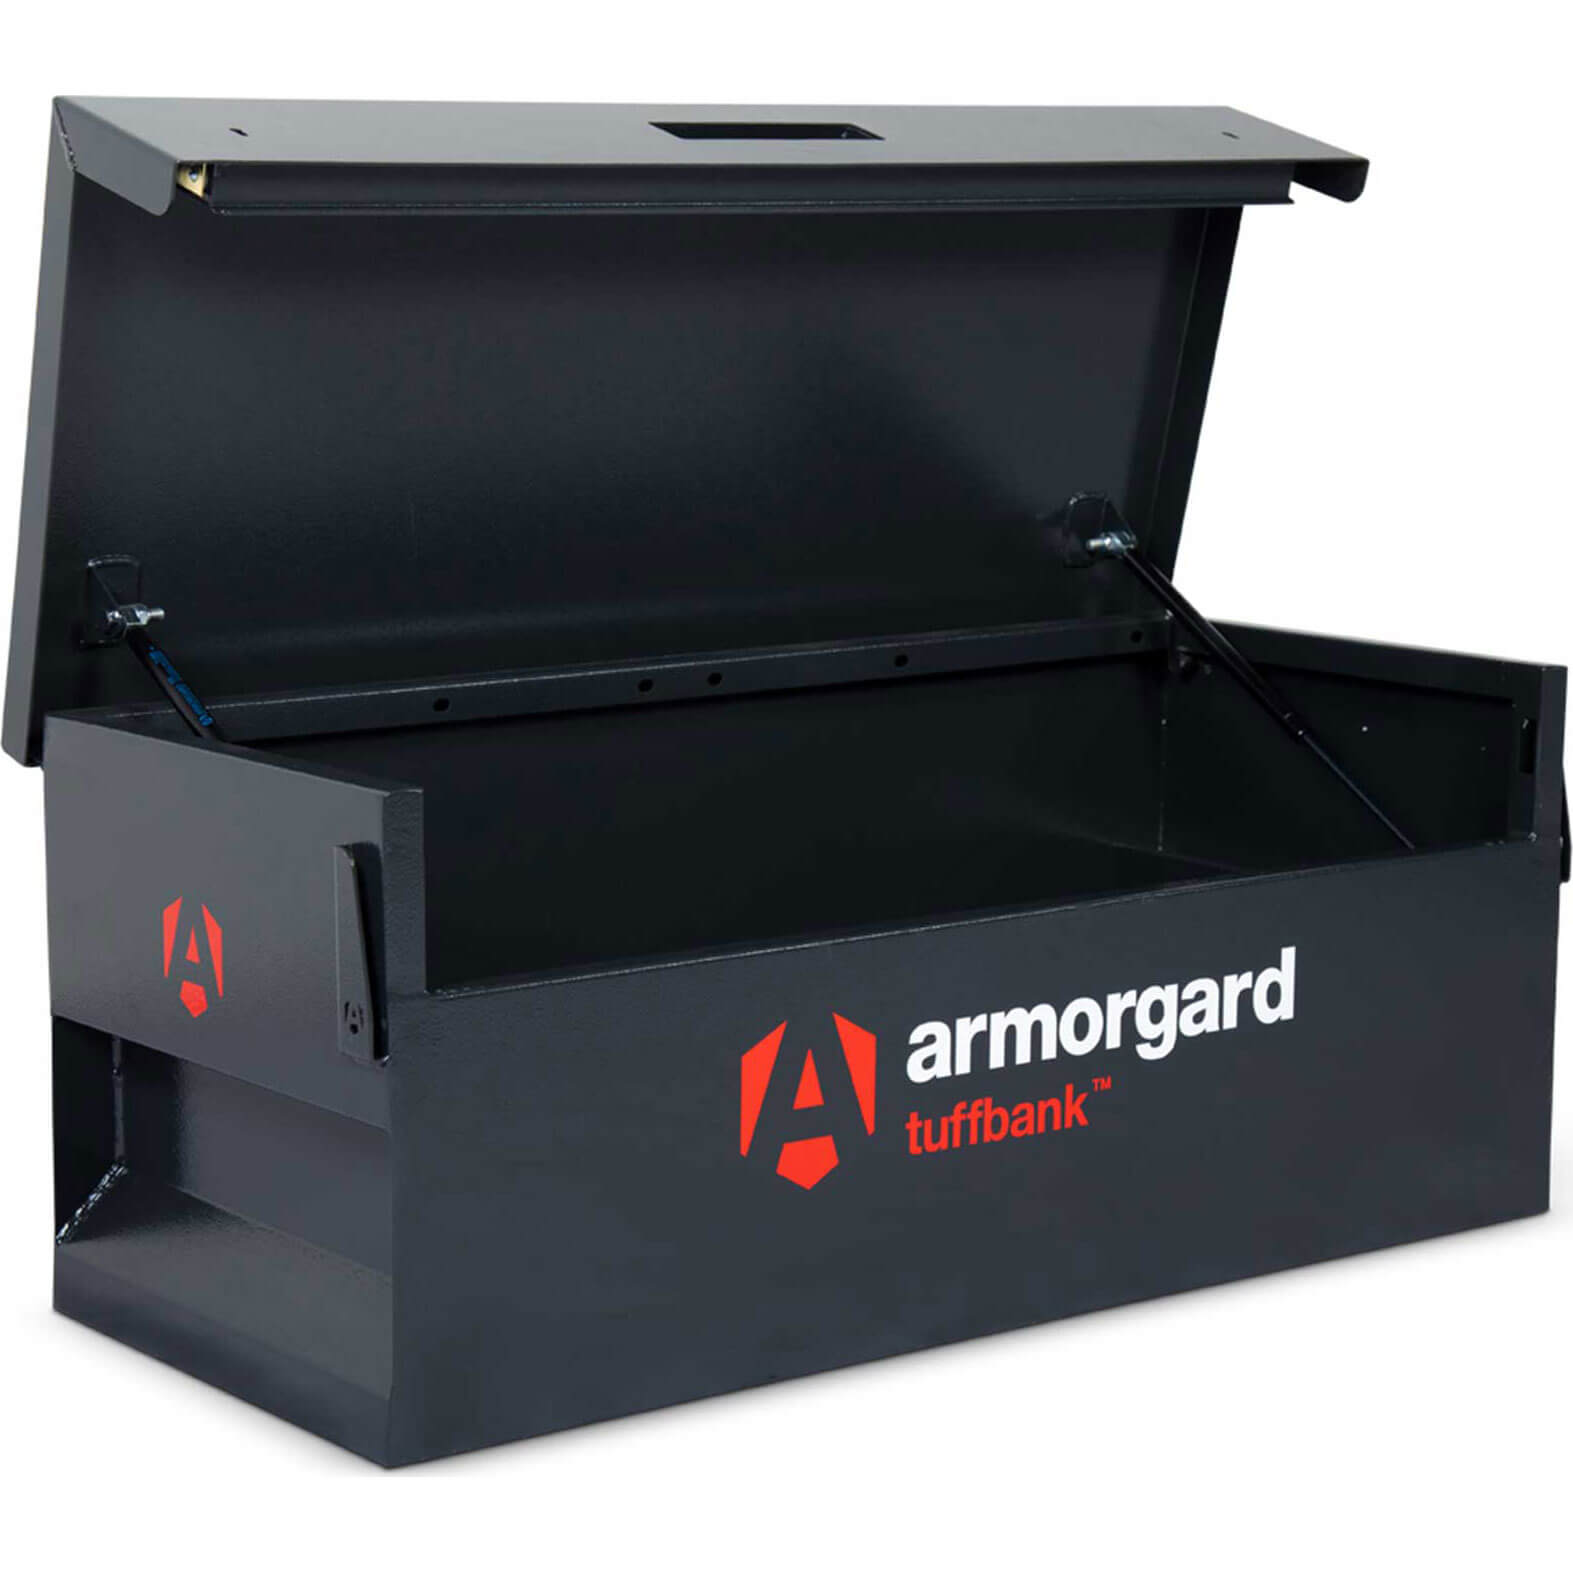 Image of Armorgard Tuffbank Secure Truck Storage Box 1275mm 515mm 450mm